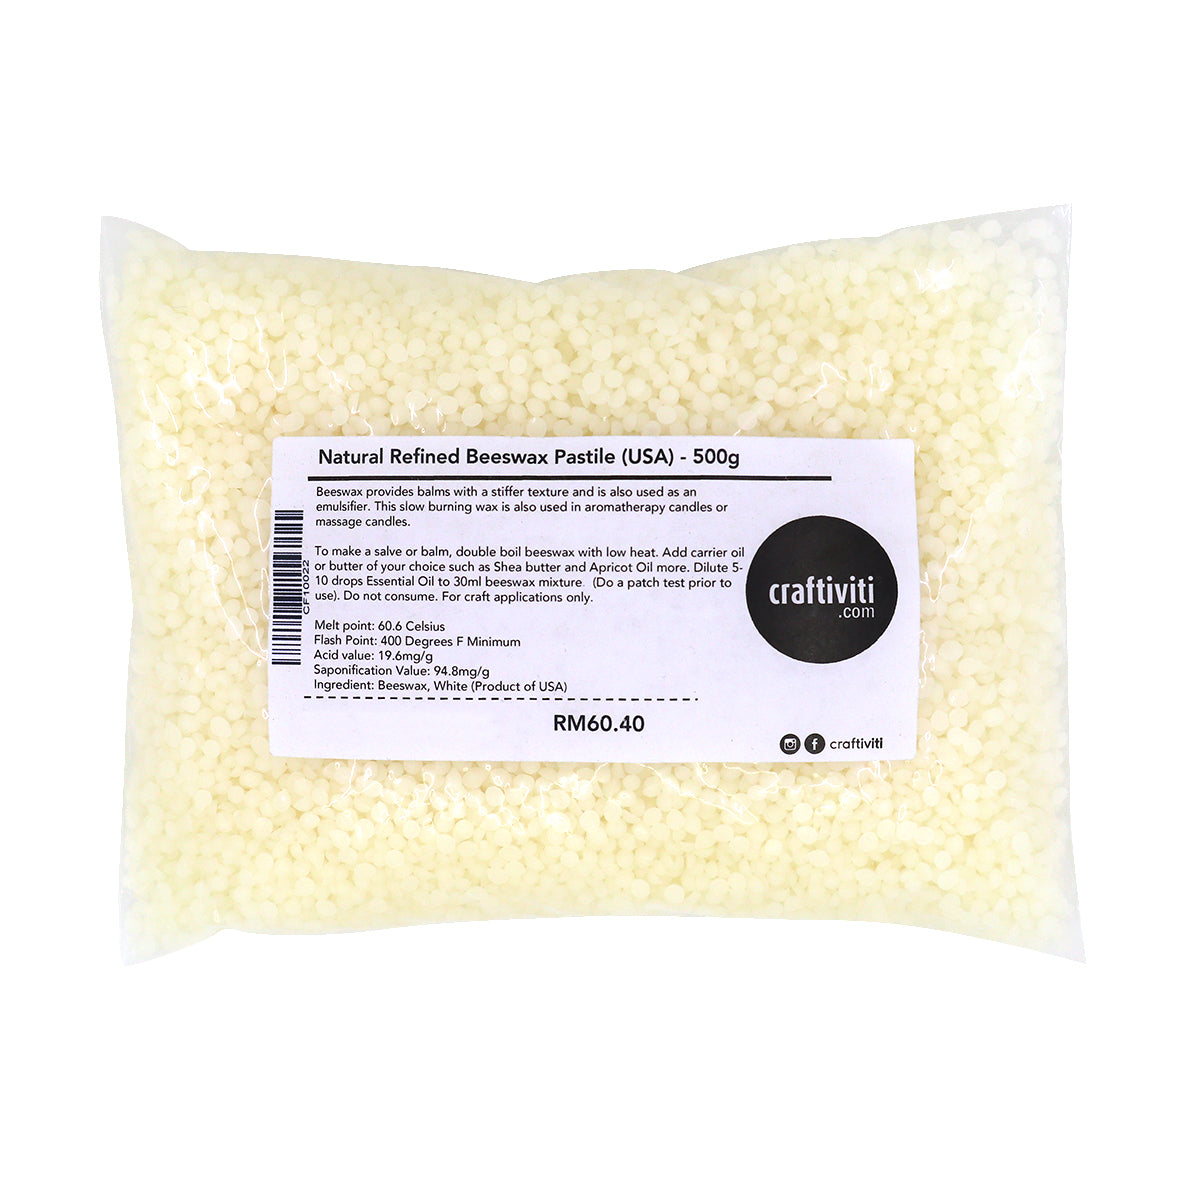 Natural Refined Beeswax Pastille (USA) Ingredients - Craftiviti